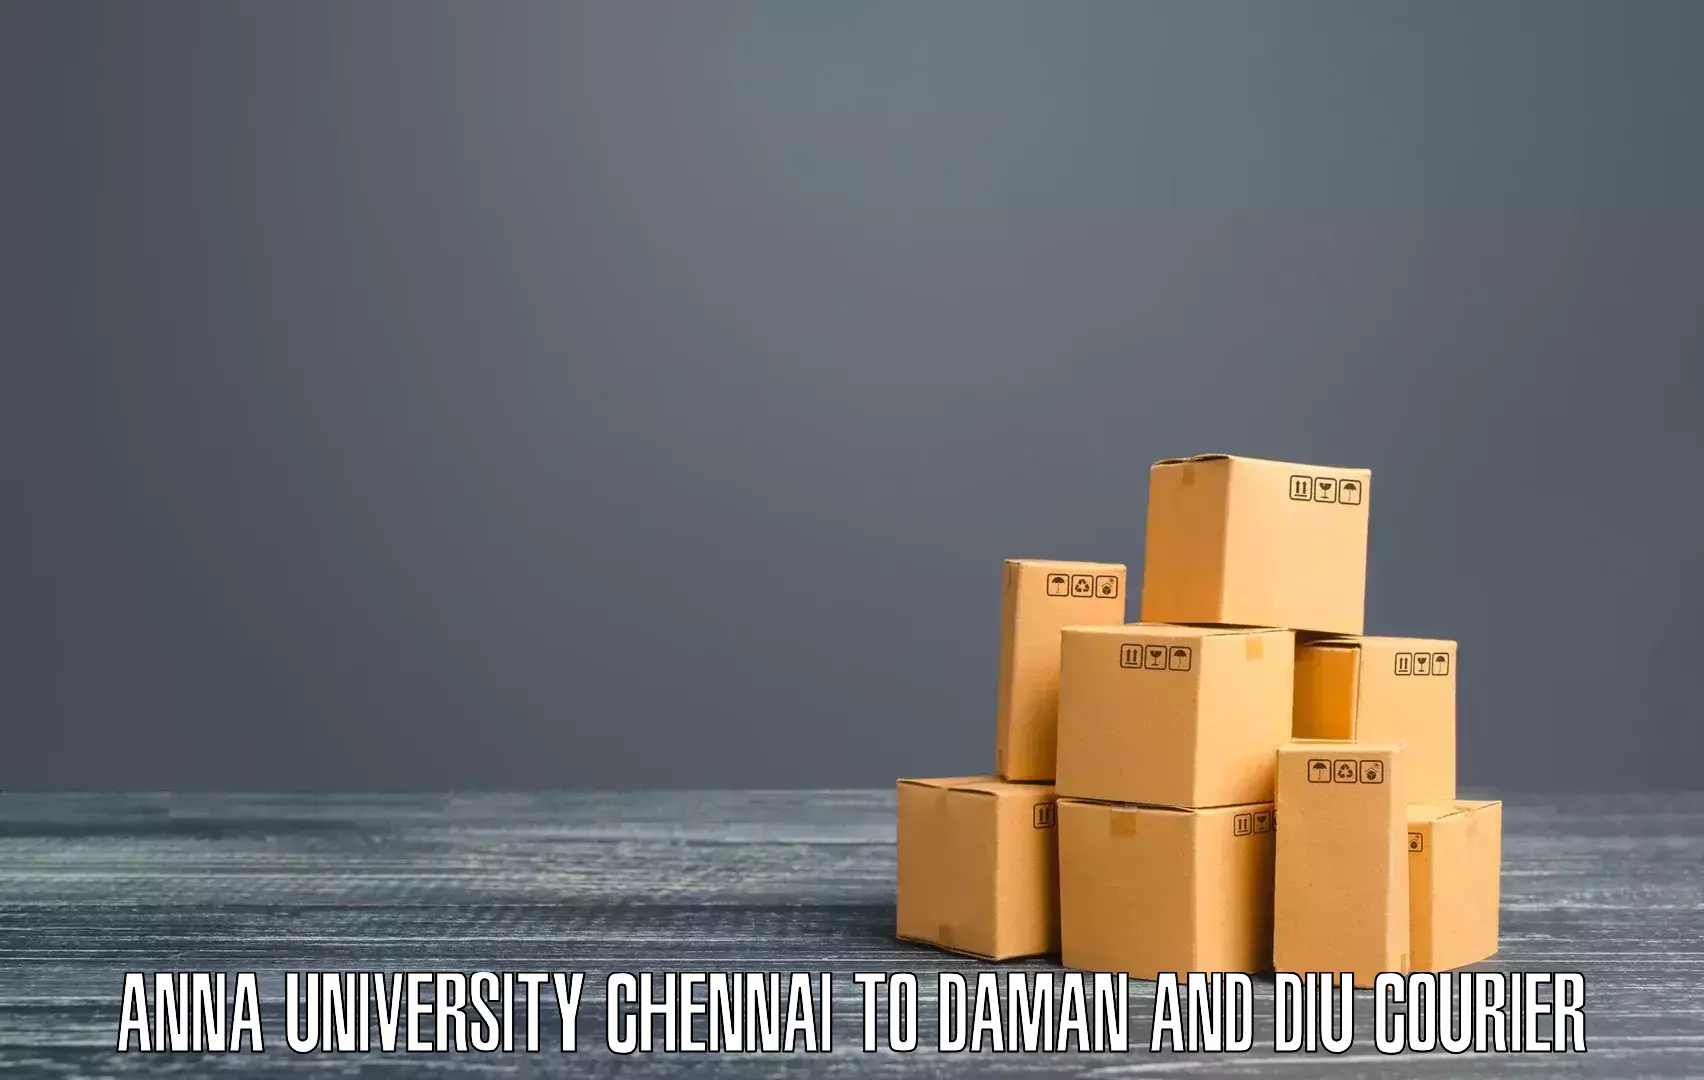 Next day courier in Anna University Chennai to Daman and Diu